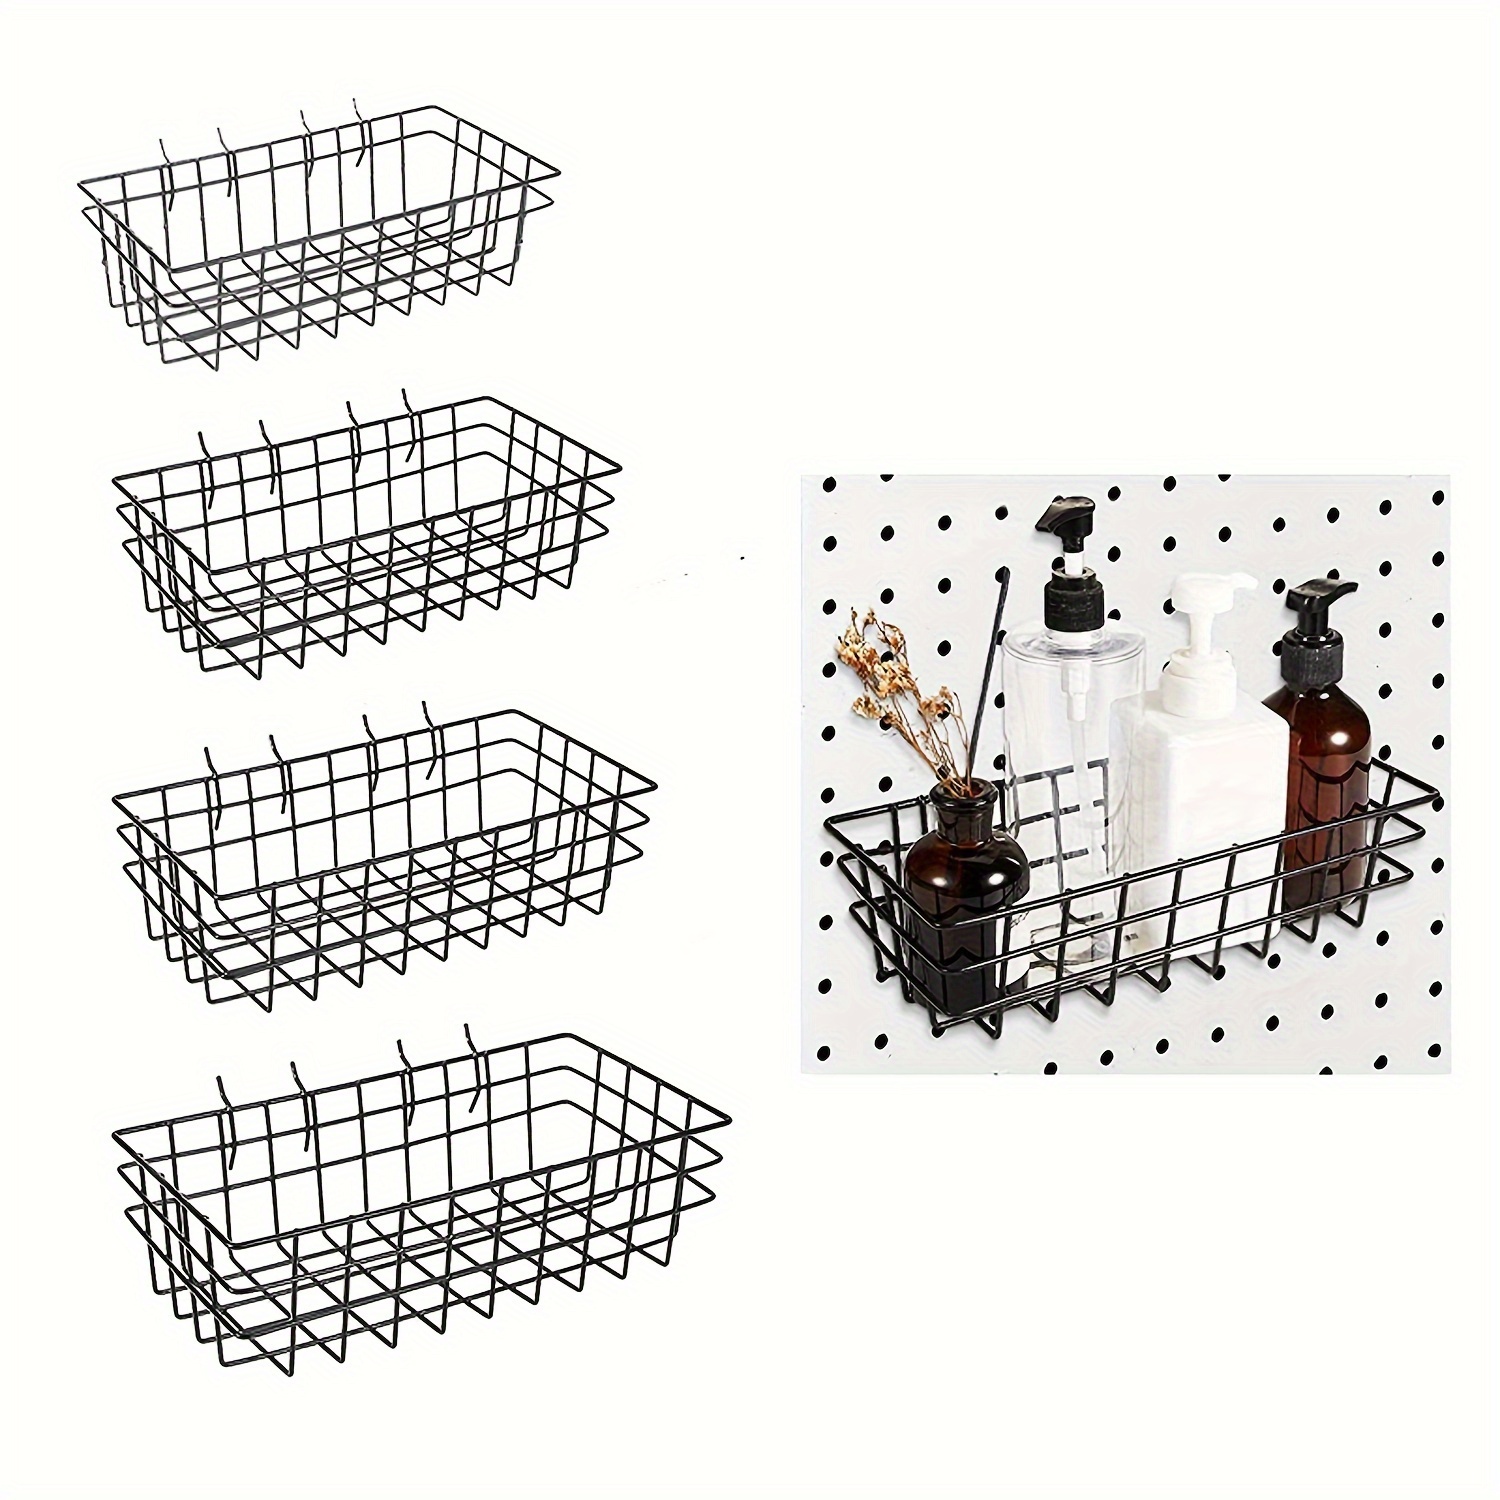 Wall Control Pegboard Hobby Craft Pegboard Organizer Storage Kit with Black  Pegboard and Black Accessories